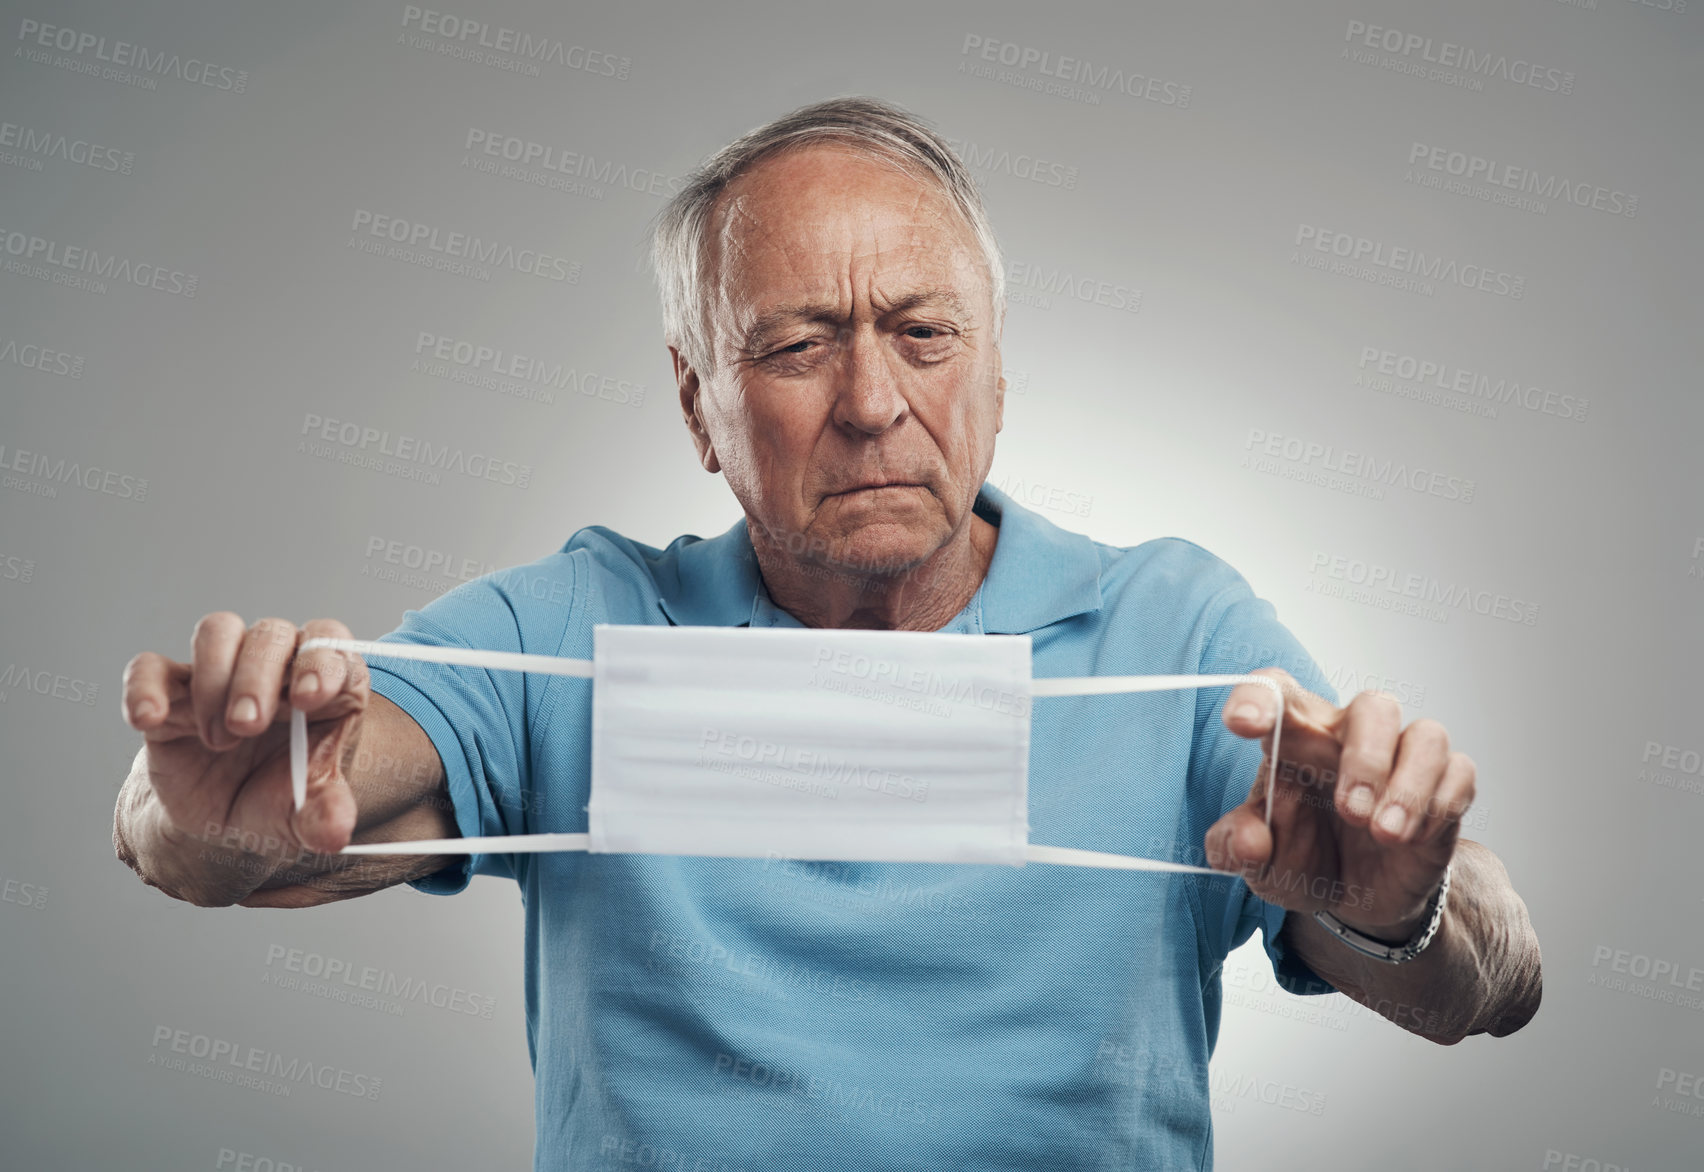 Buy stock photo Shot of an elderly man holding a protective face mask in a studio agains a grey background